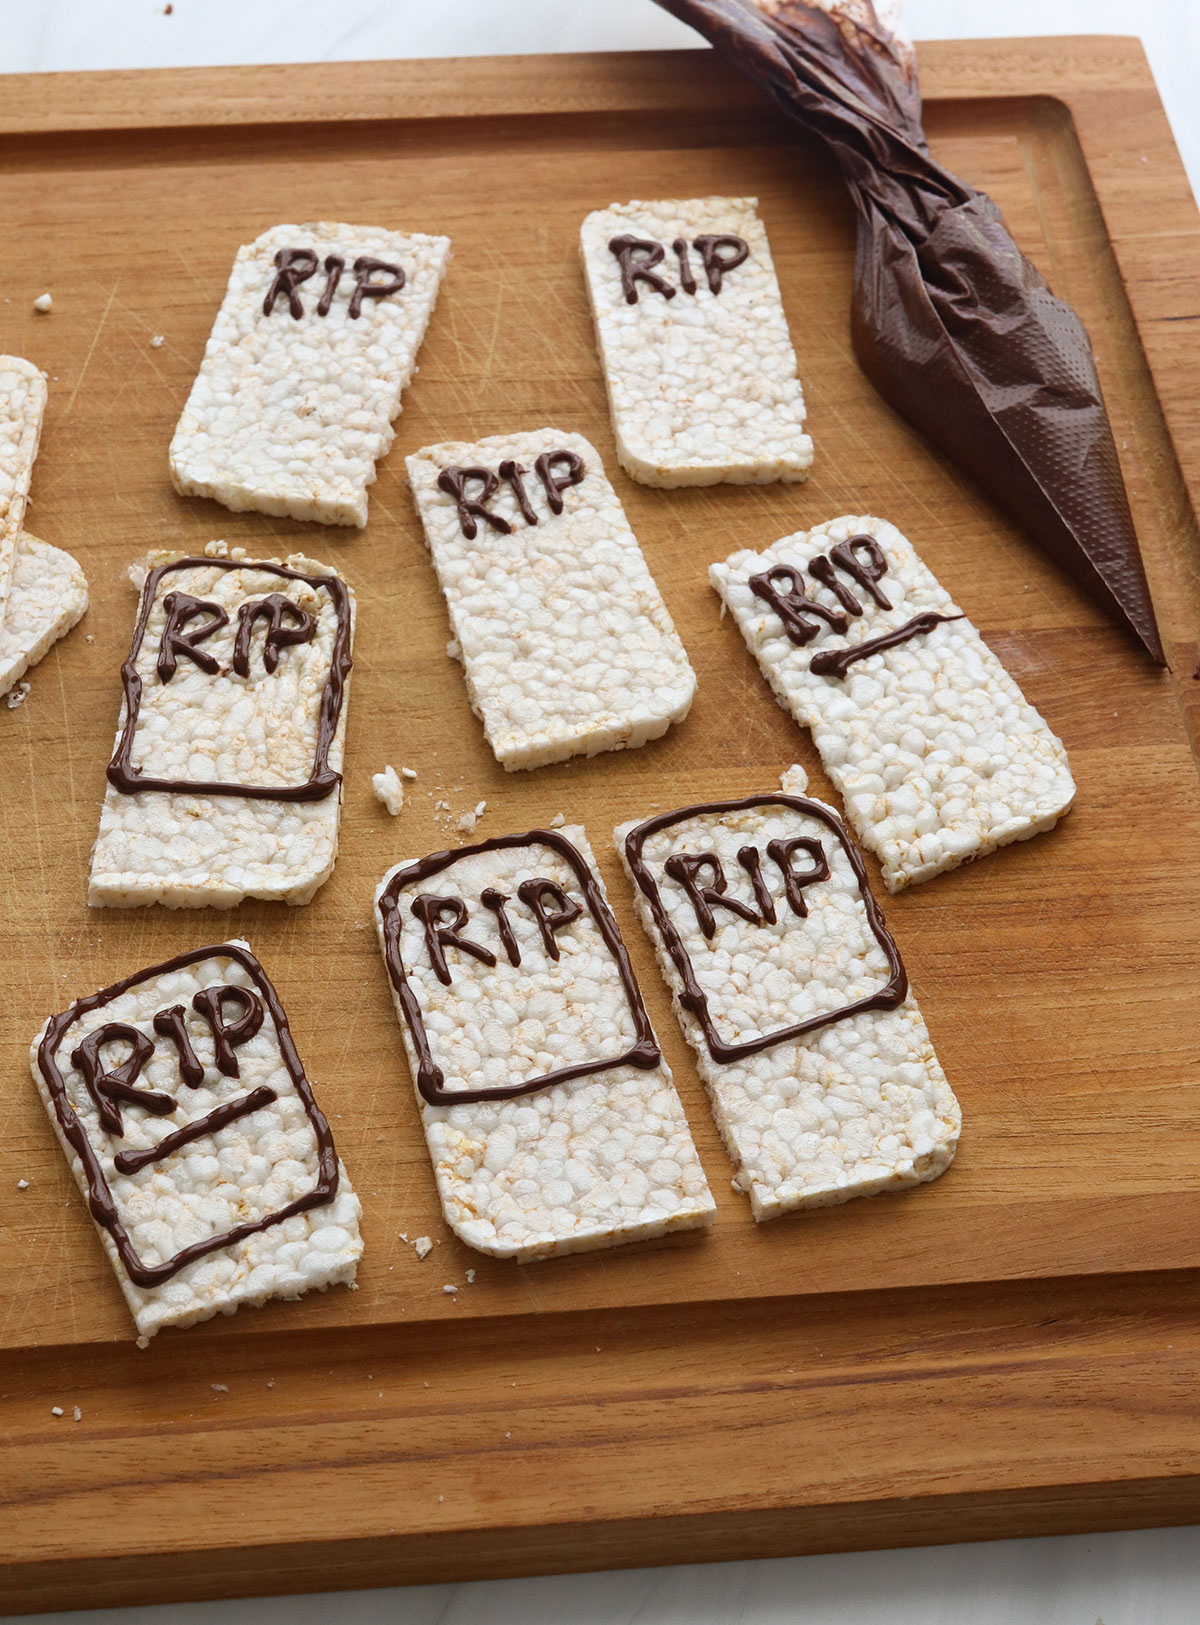 melted chocolate added to rice crackers to look like tombstones.